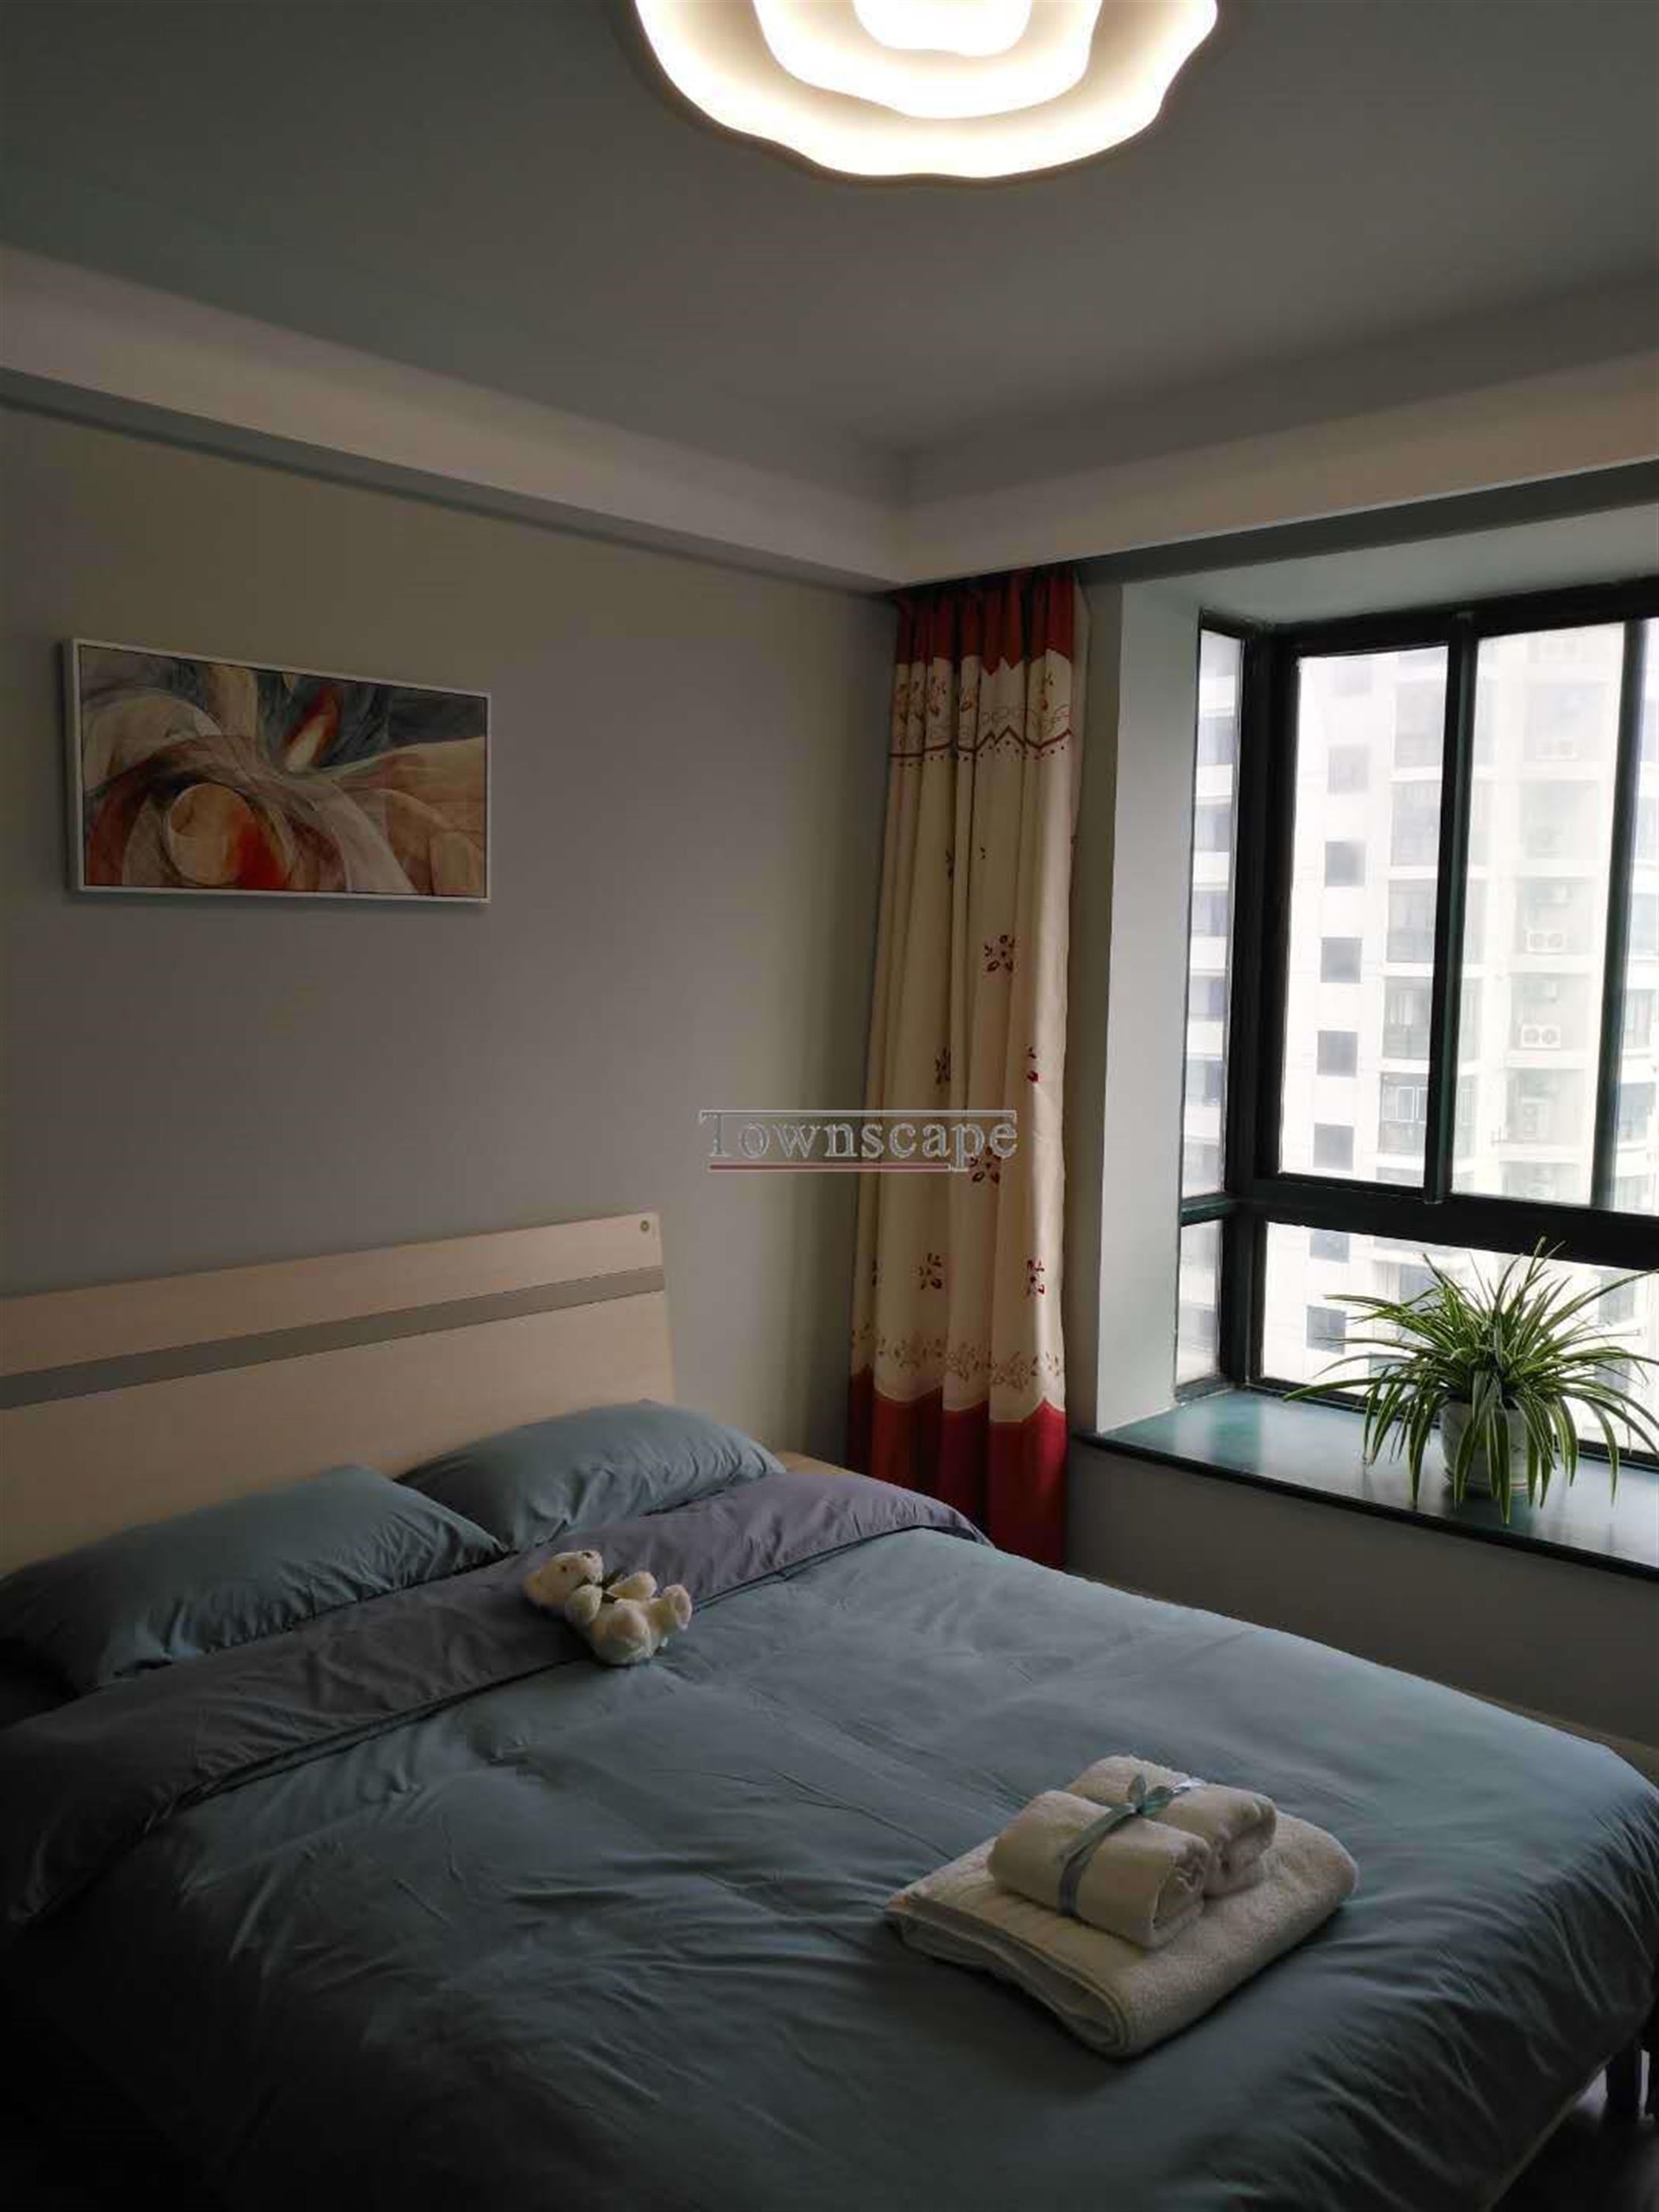 alcove windows Comfortable Xintiandi 2BR Apartment nr LN 8/10/13 for Rent in Shanghai